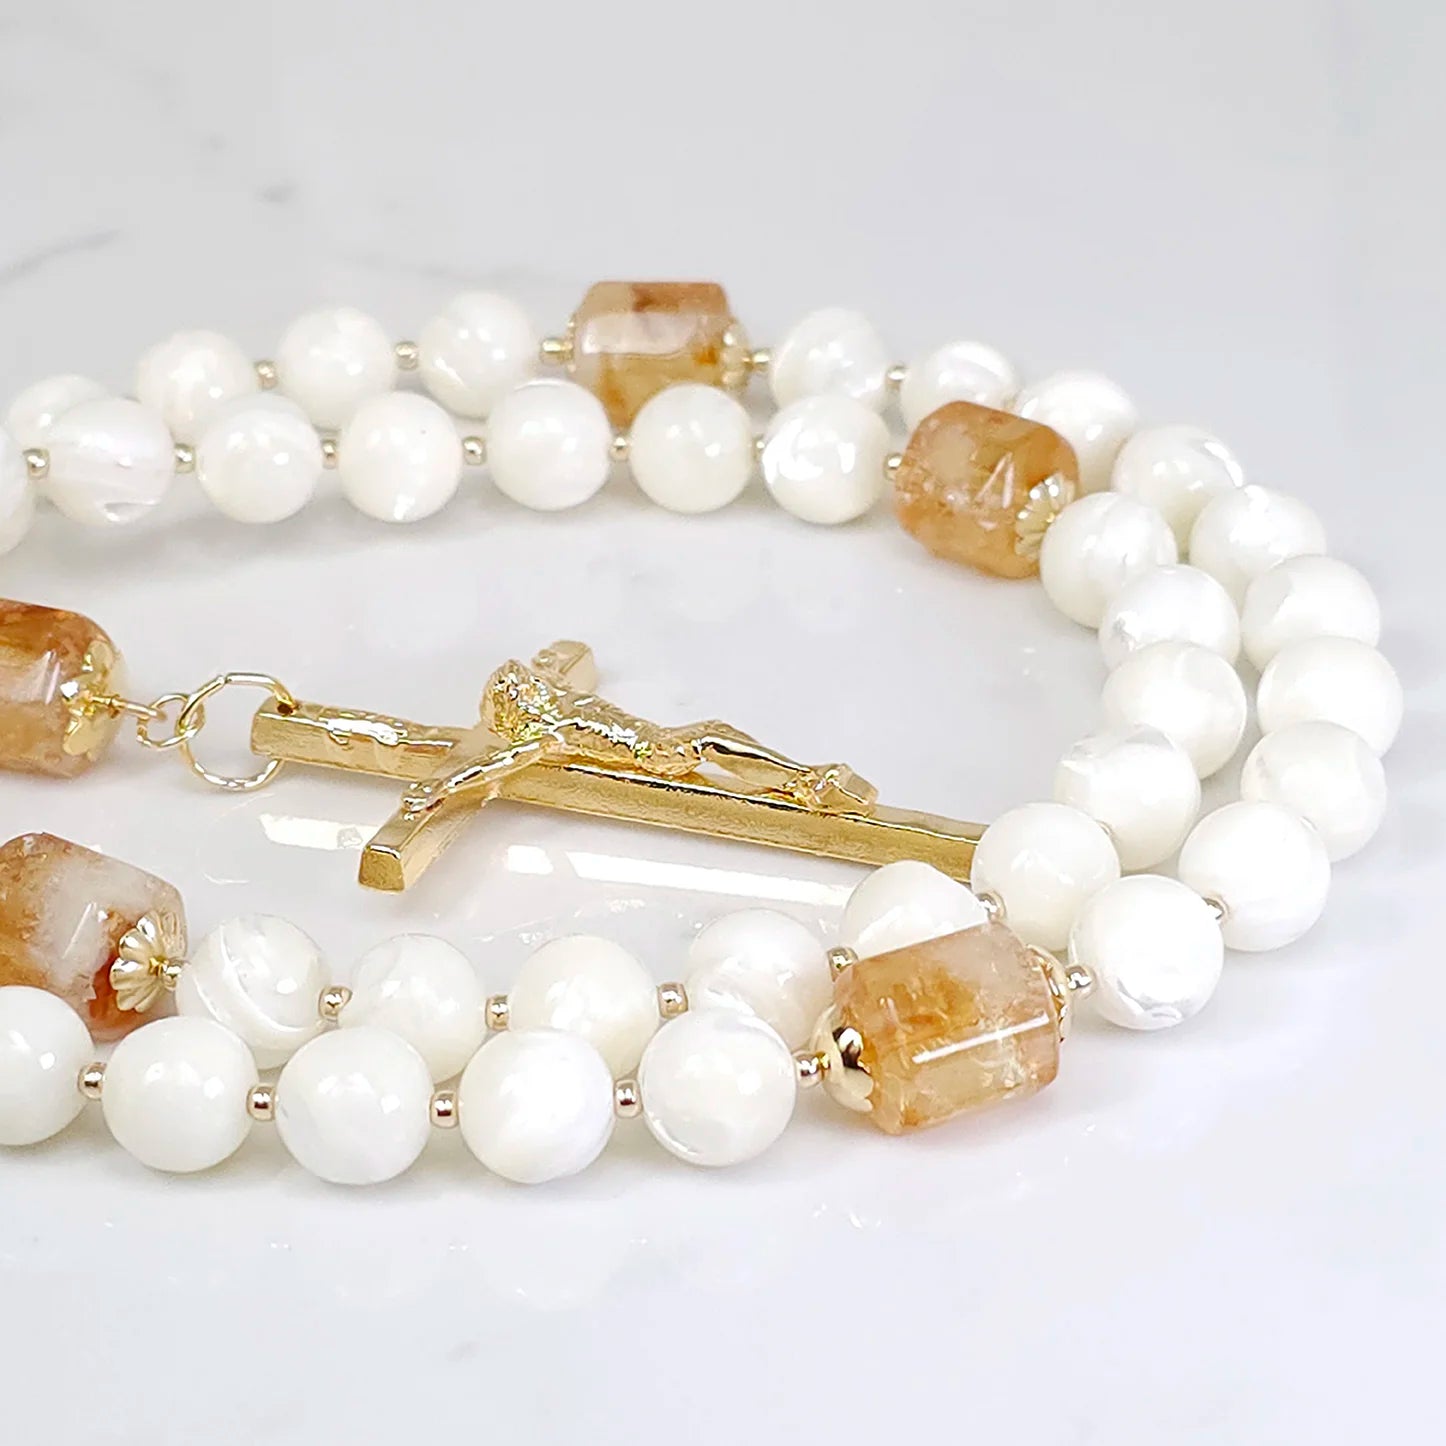 Authentic rosary highlighting the beauty of Mother of Pearl and Golden Citrine, carefully positioned on a white table.